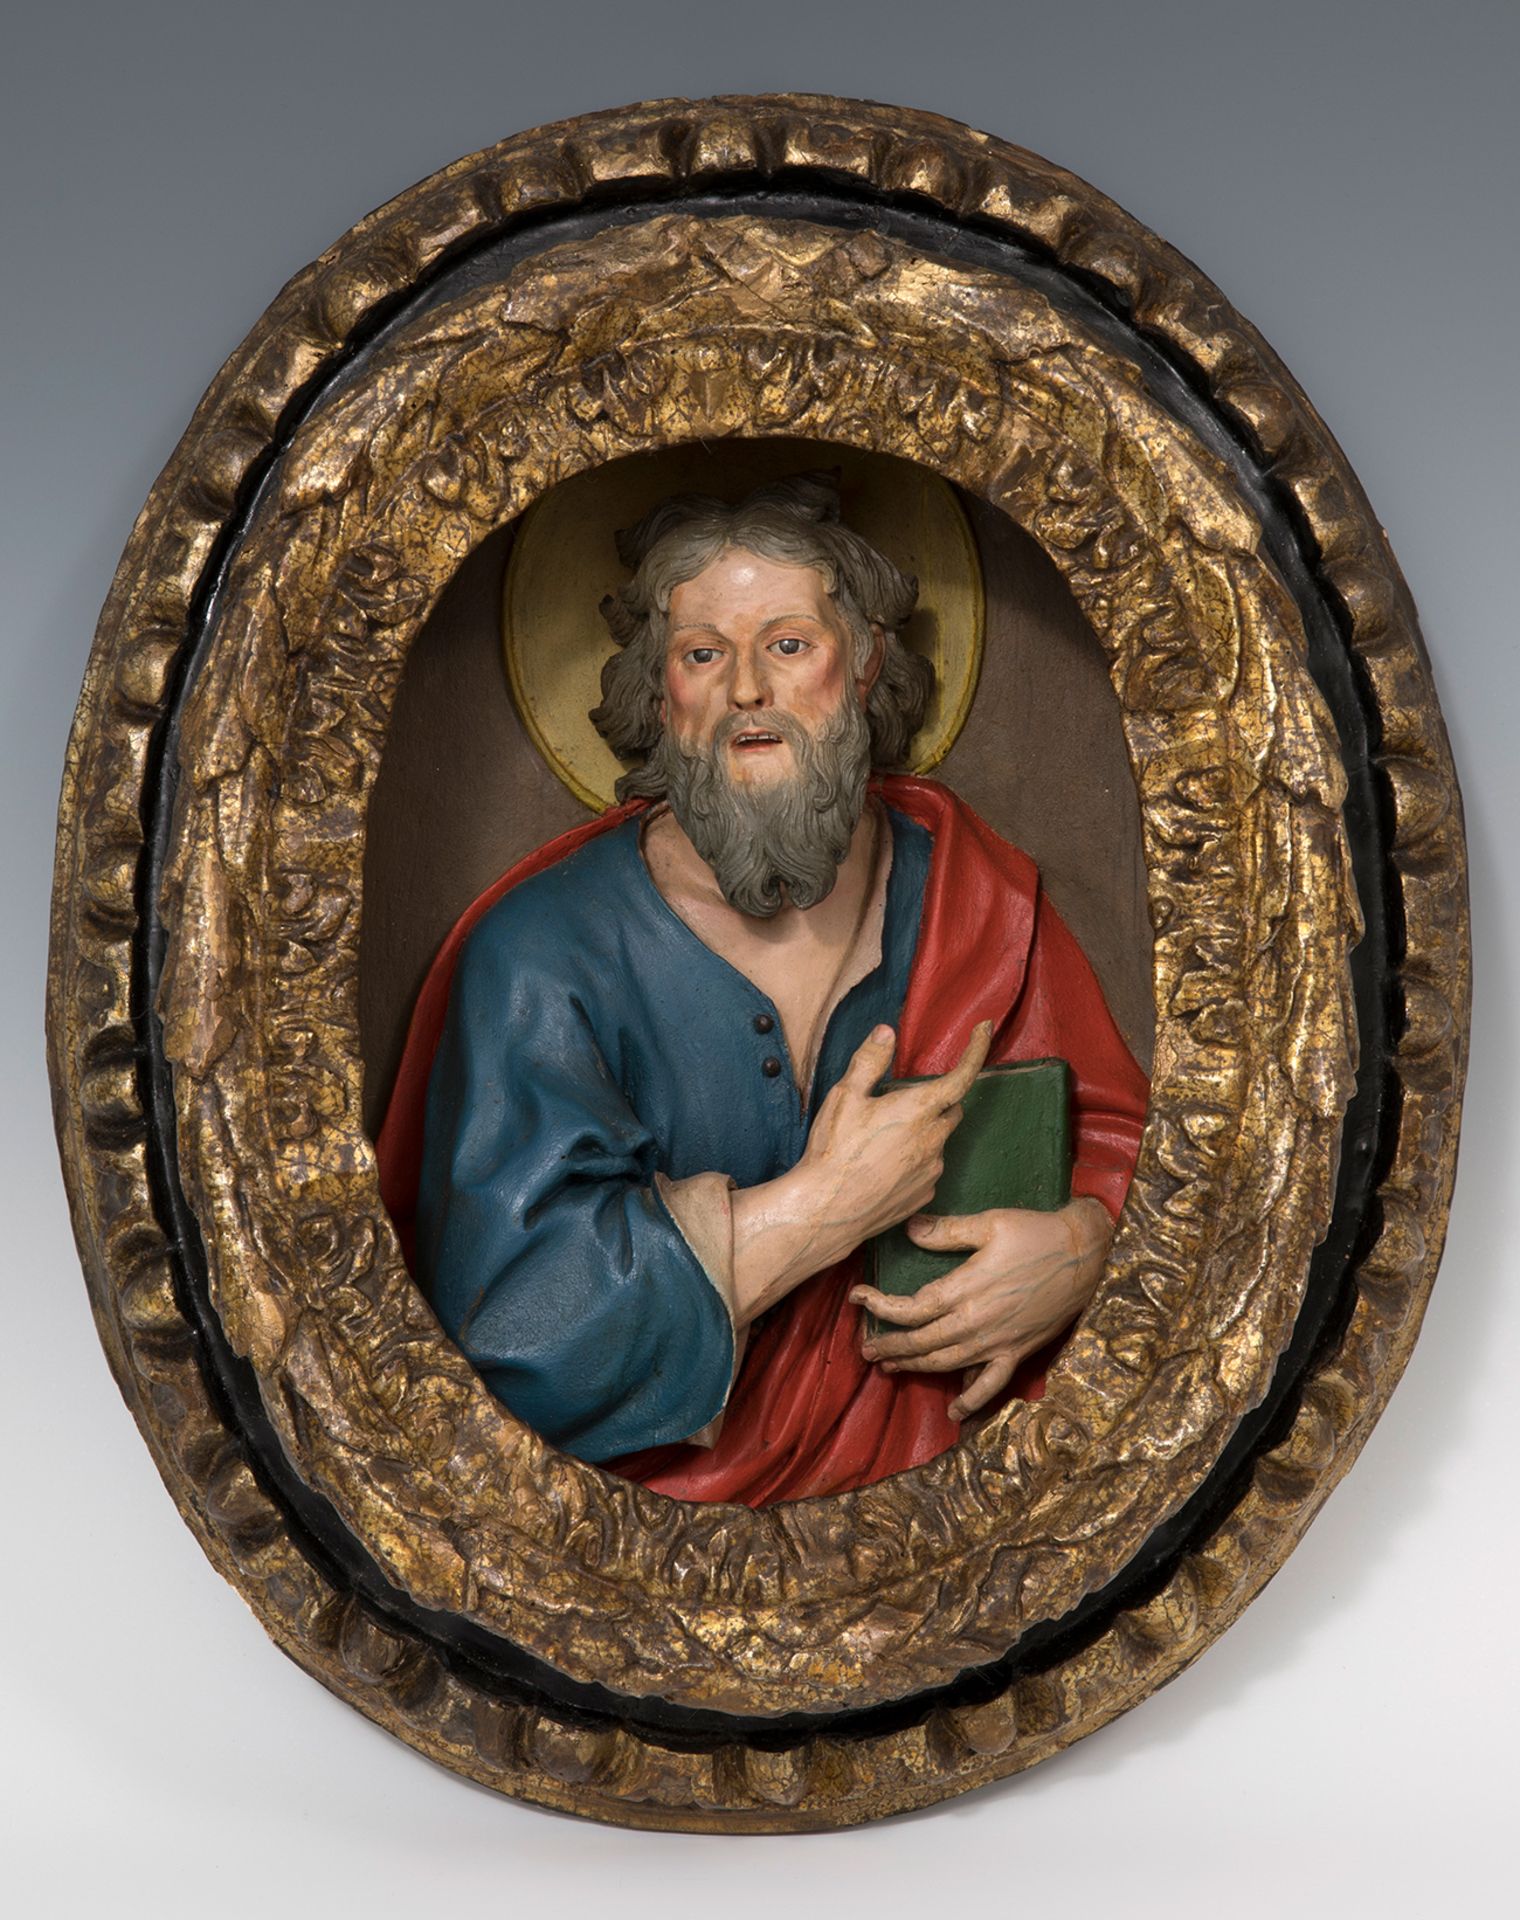 Italian school, 17th century."Saint Matthew".High relief in carved and polychrome wood. Vitreous